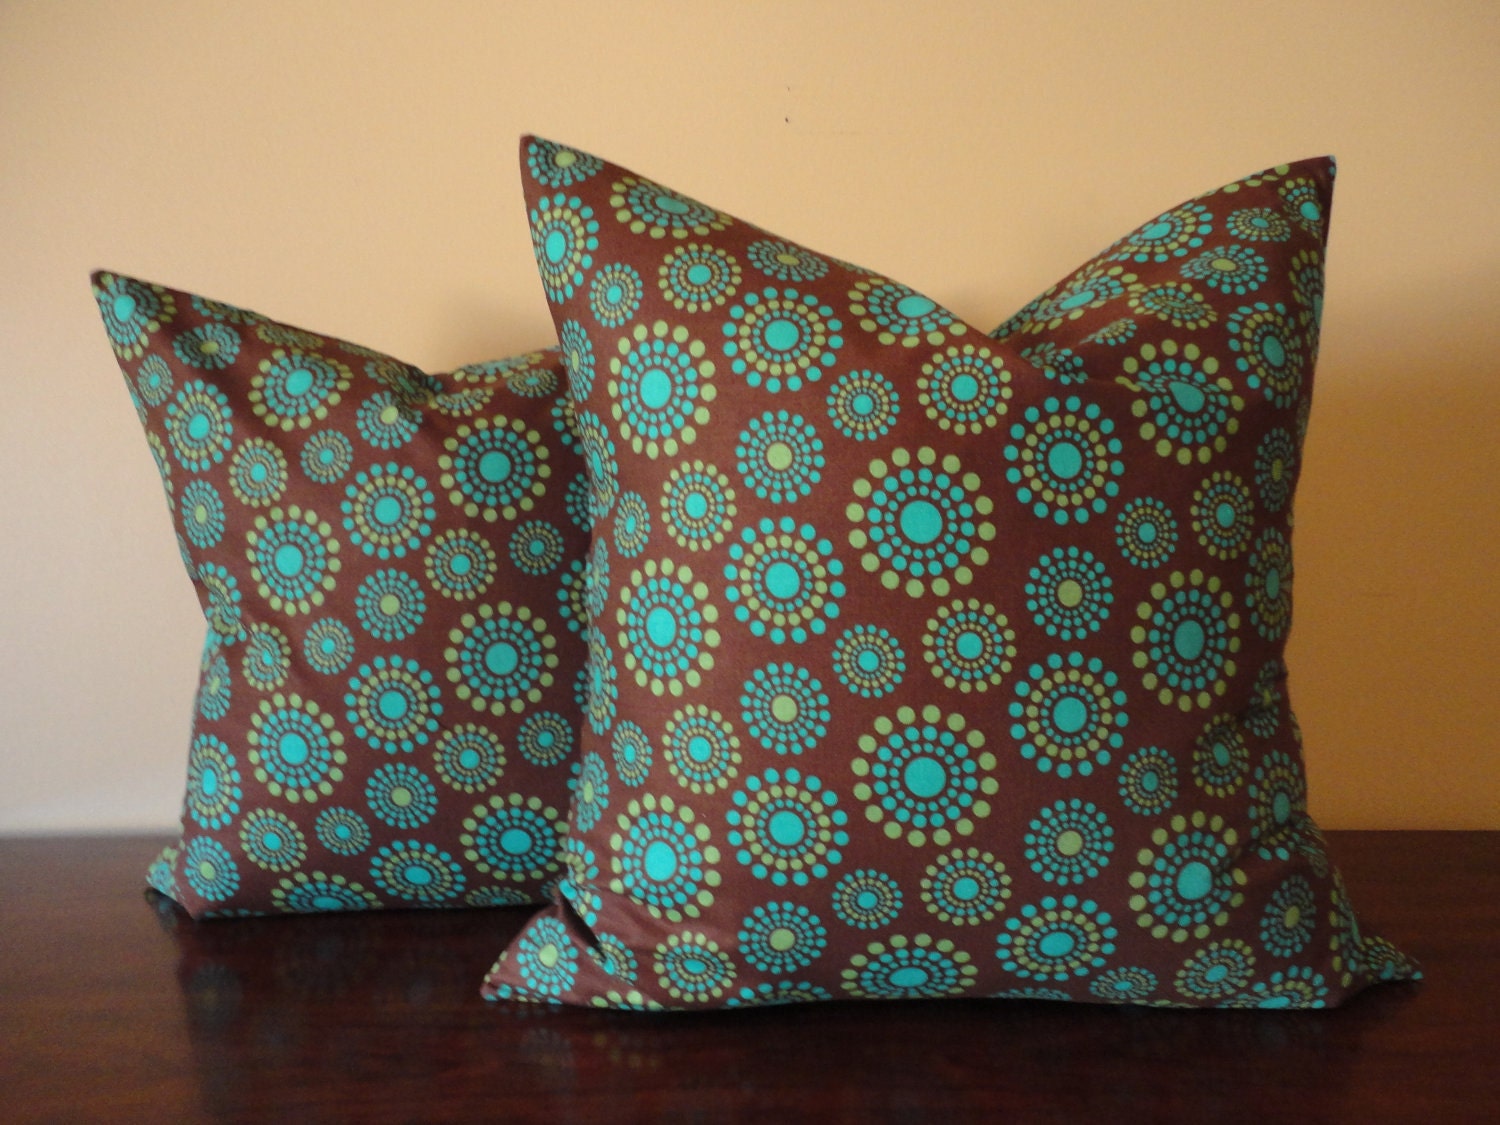 Pillow Covers-PAIR 18" x 18" Turquoise and Brown Modern